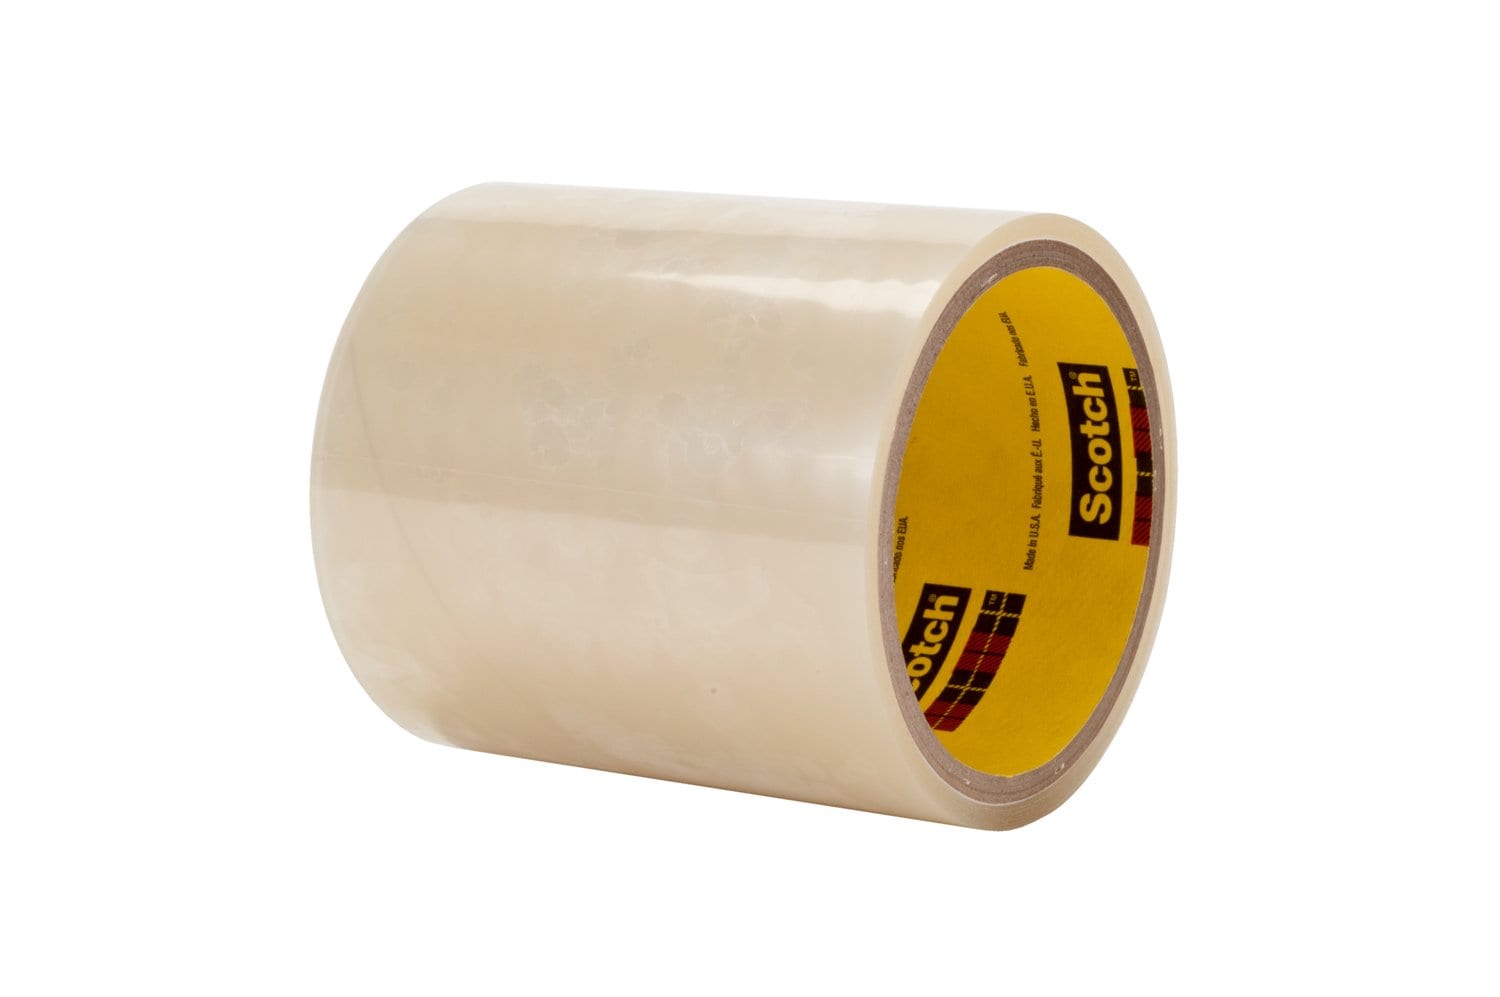 7000123358 - 3M Adhesive Transfer Tape 467MP, Clear, 1/2 in x 60 yd, 2 mil, 72 rolls
per case